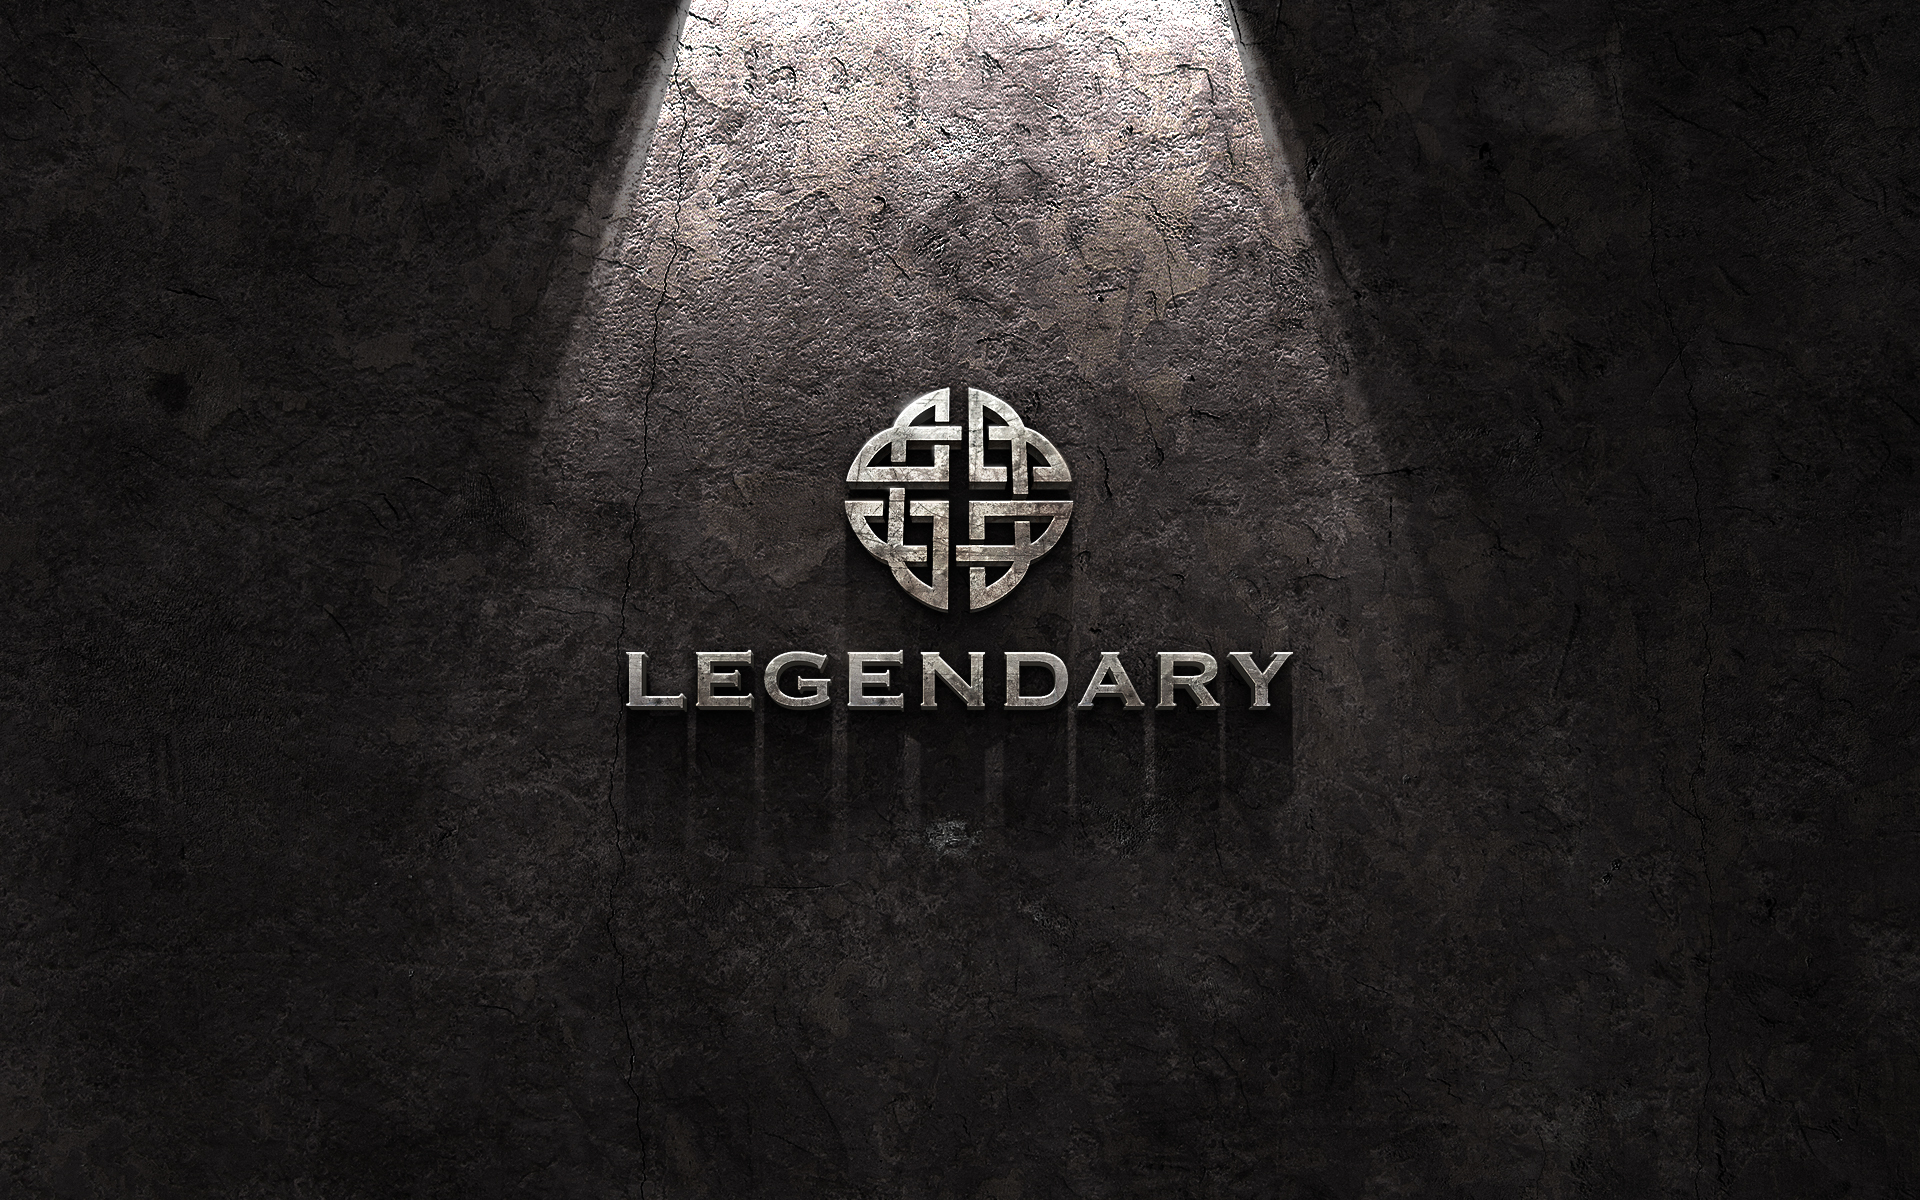 What is Legendary Bringing to Comic-Con 2015?